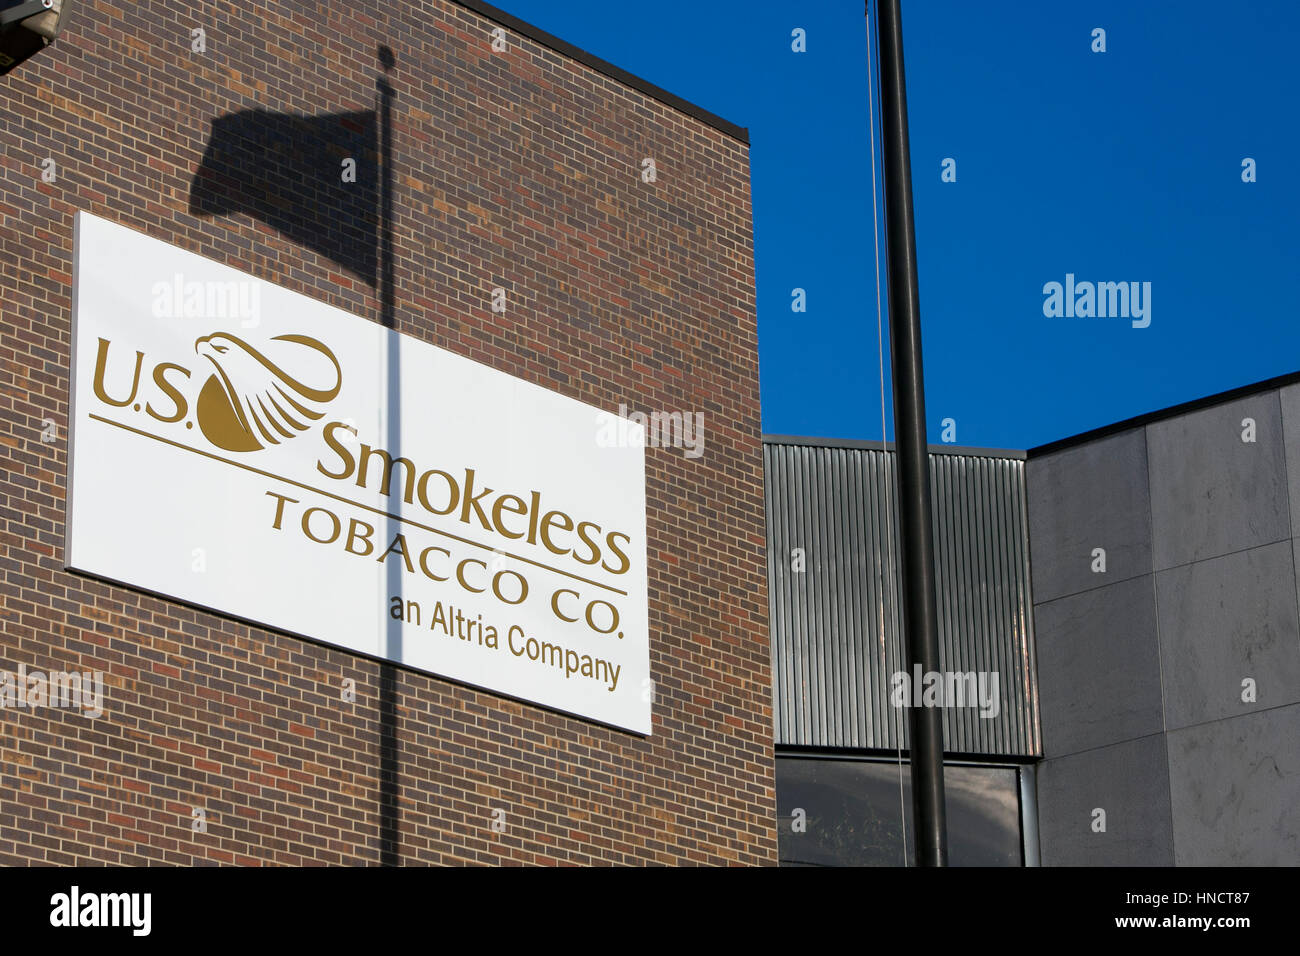 A logo sign outside of a facility occupied by the U.S. Smokeless Tobacco Company in Nashville, Tennessee on February 4, 2017. Stock Photo